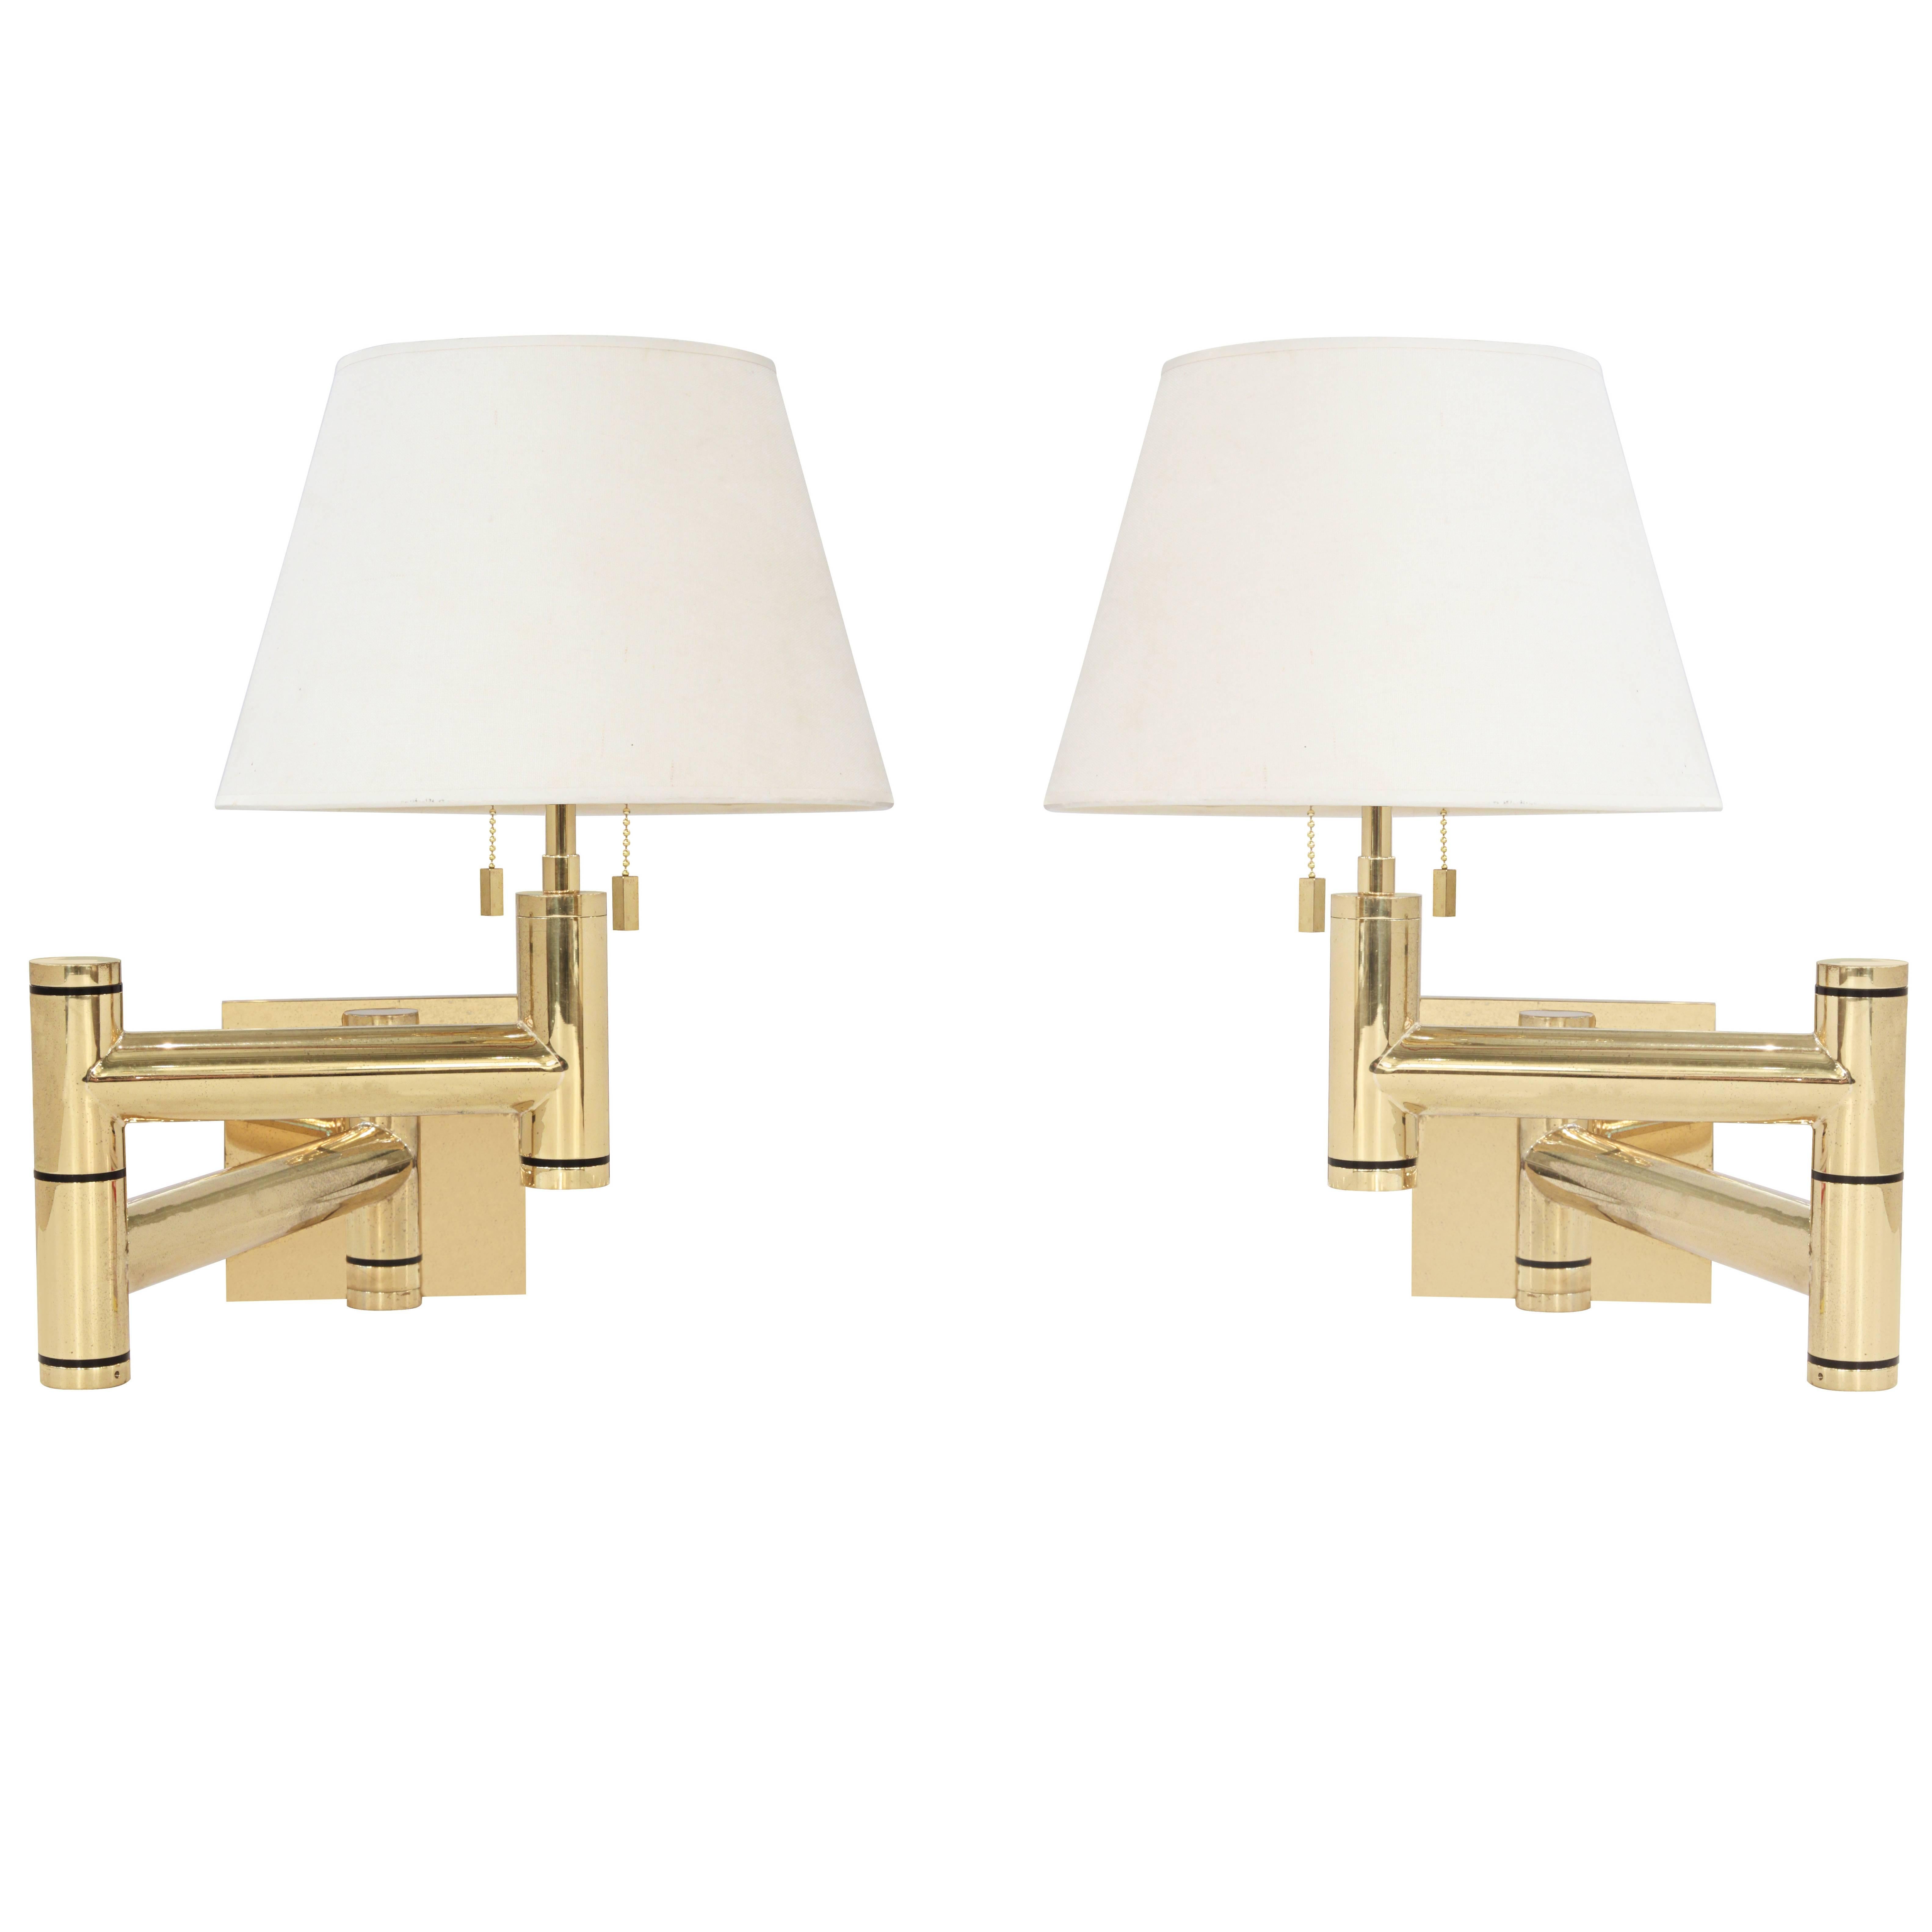 Pair of Exceptional Swing Arm Wall Lamps by Karl Springer